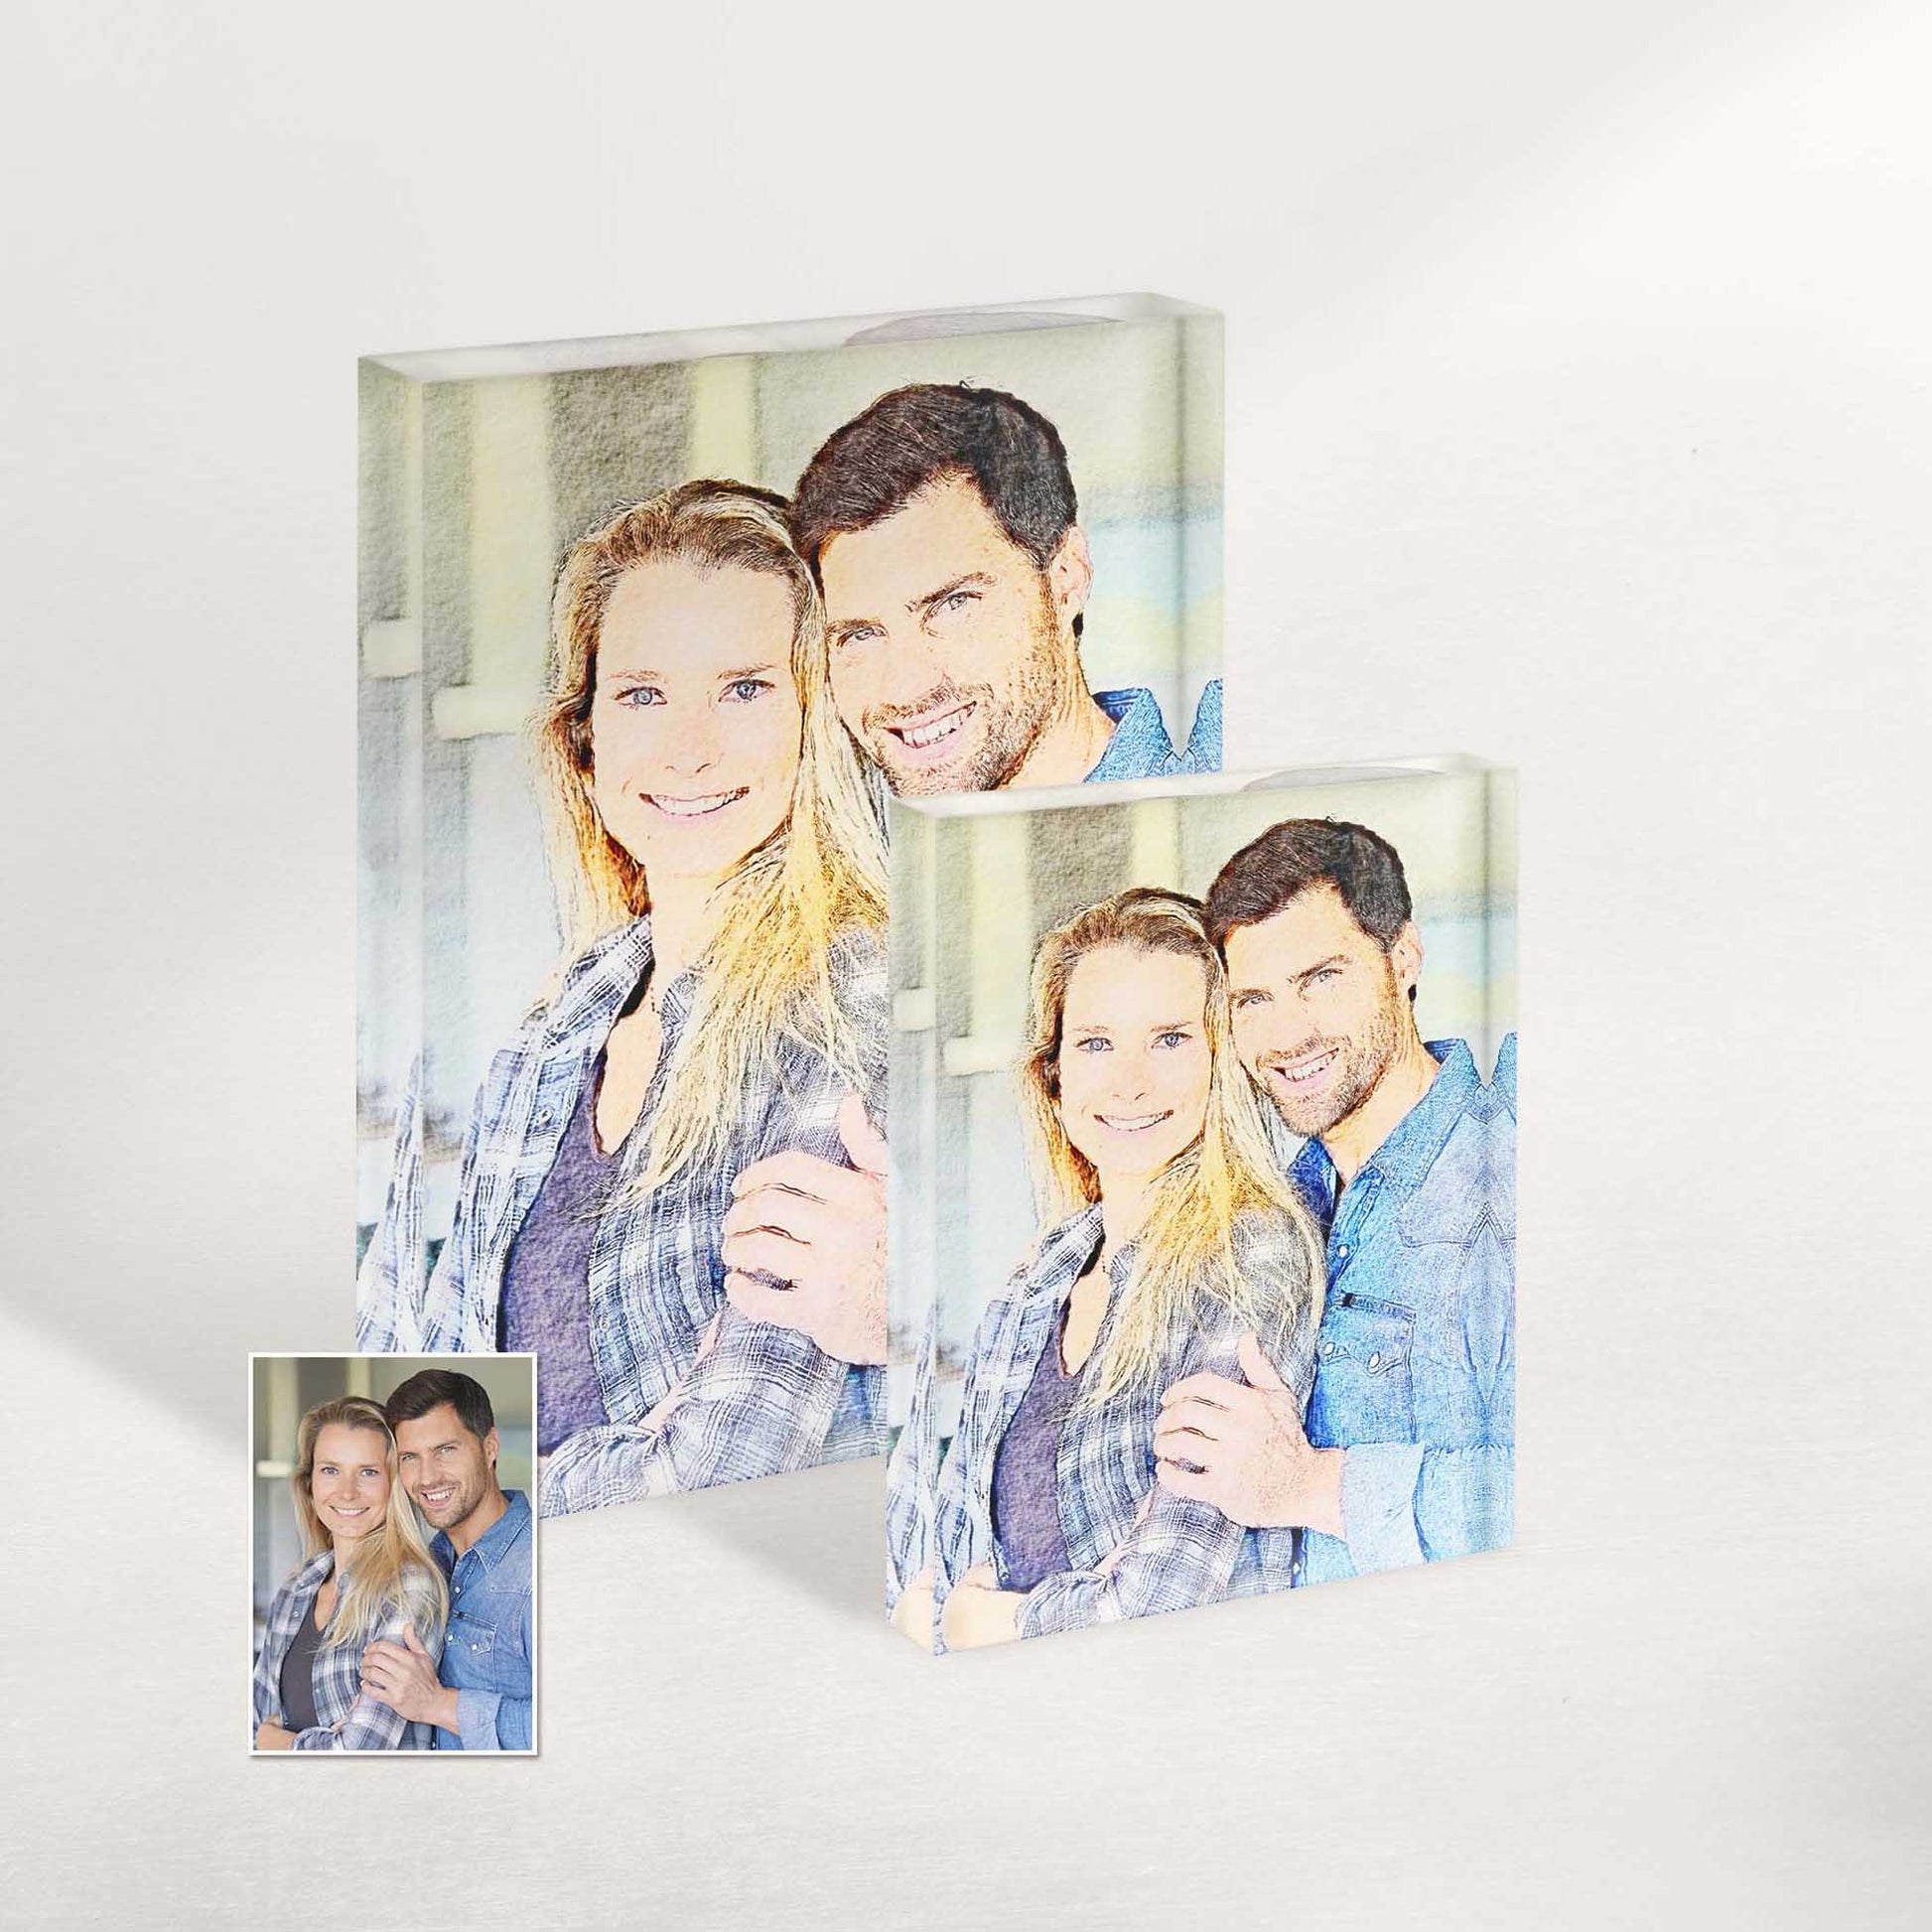 Turn your precious memories into captivating works of art with our Personalised Just Watercolor Effect Acrylic Block Photo. We use your own photo to create an original watercolor-inspired masterpiece